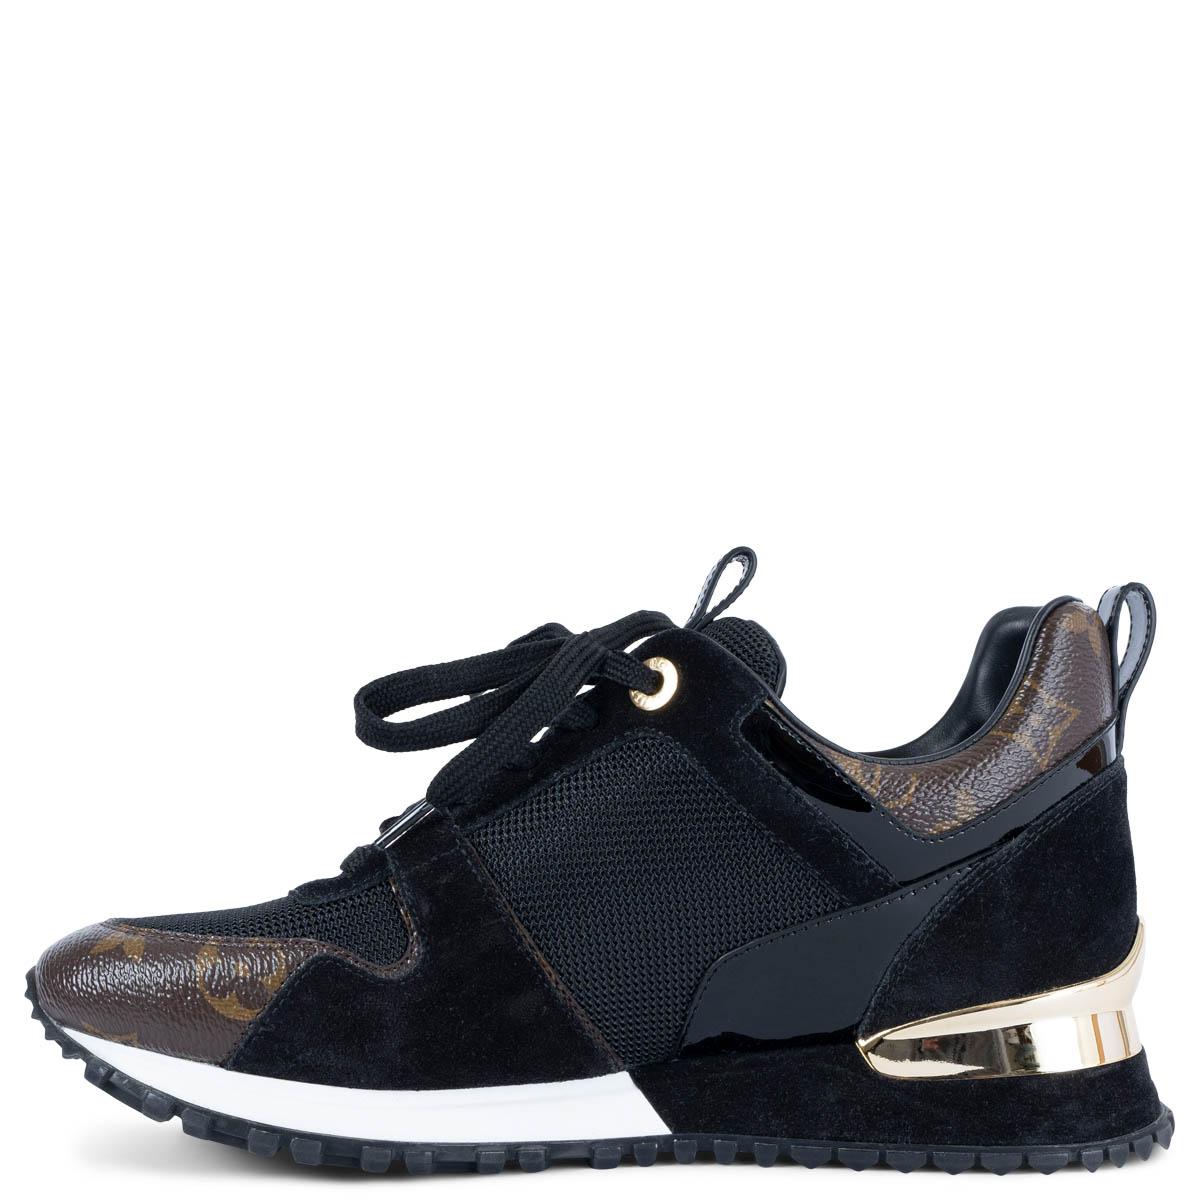 100% authentic Louis Vuitton Run Away sneakers in black suede and technical fabric with Ebene brown Monogram canvas and black patent leather details. Features a circular LV logo on the side, technical rubber sole and gold-tone metal stabilizer. Have